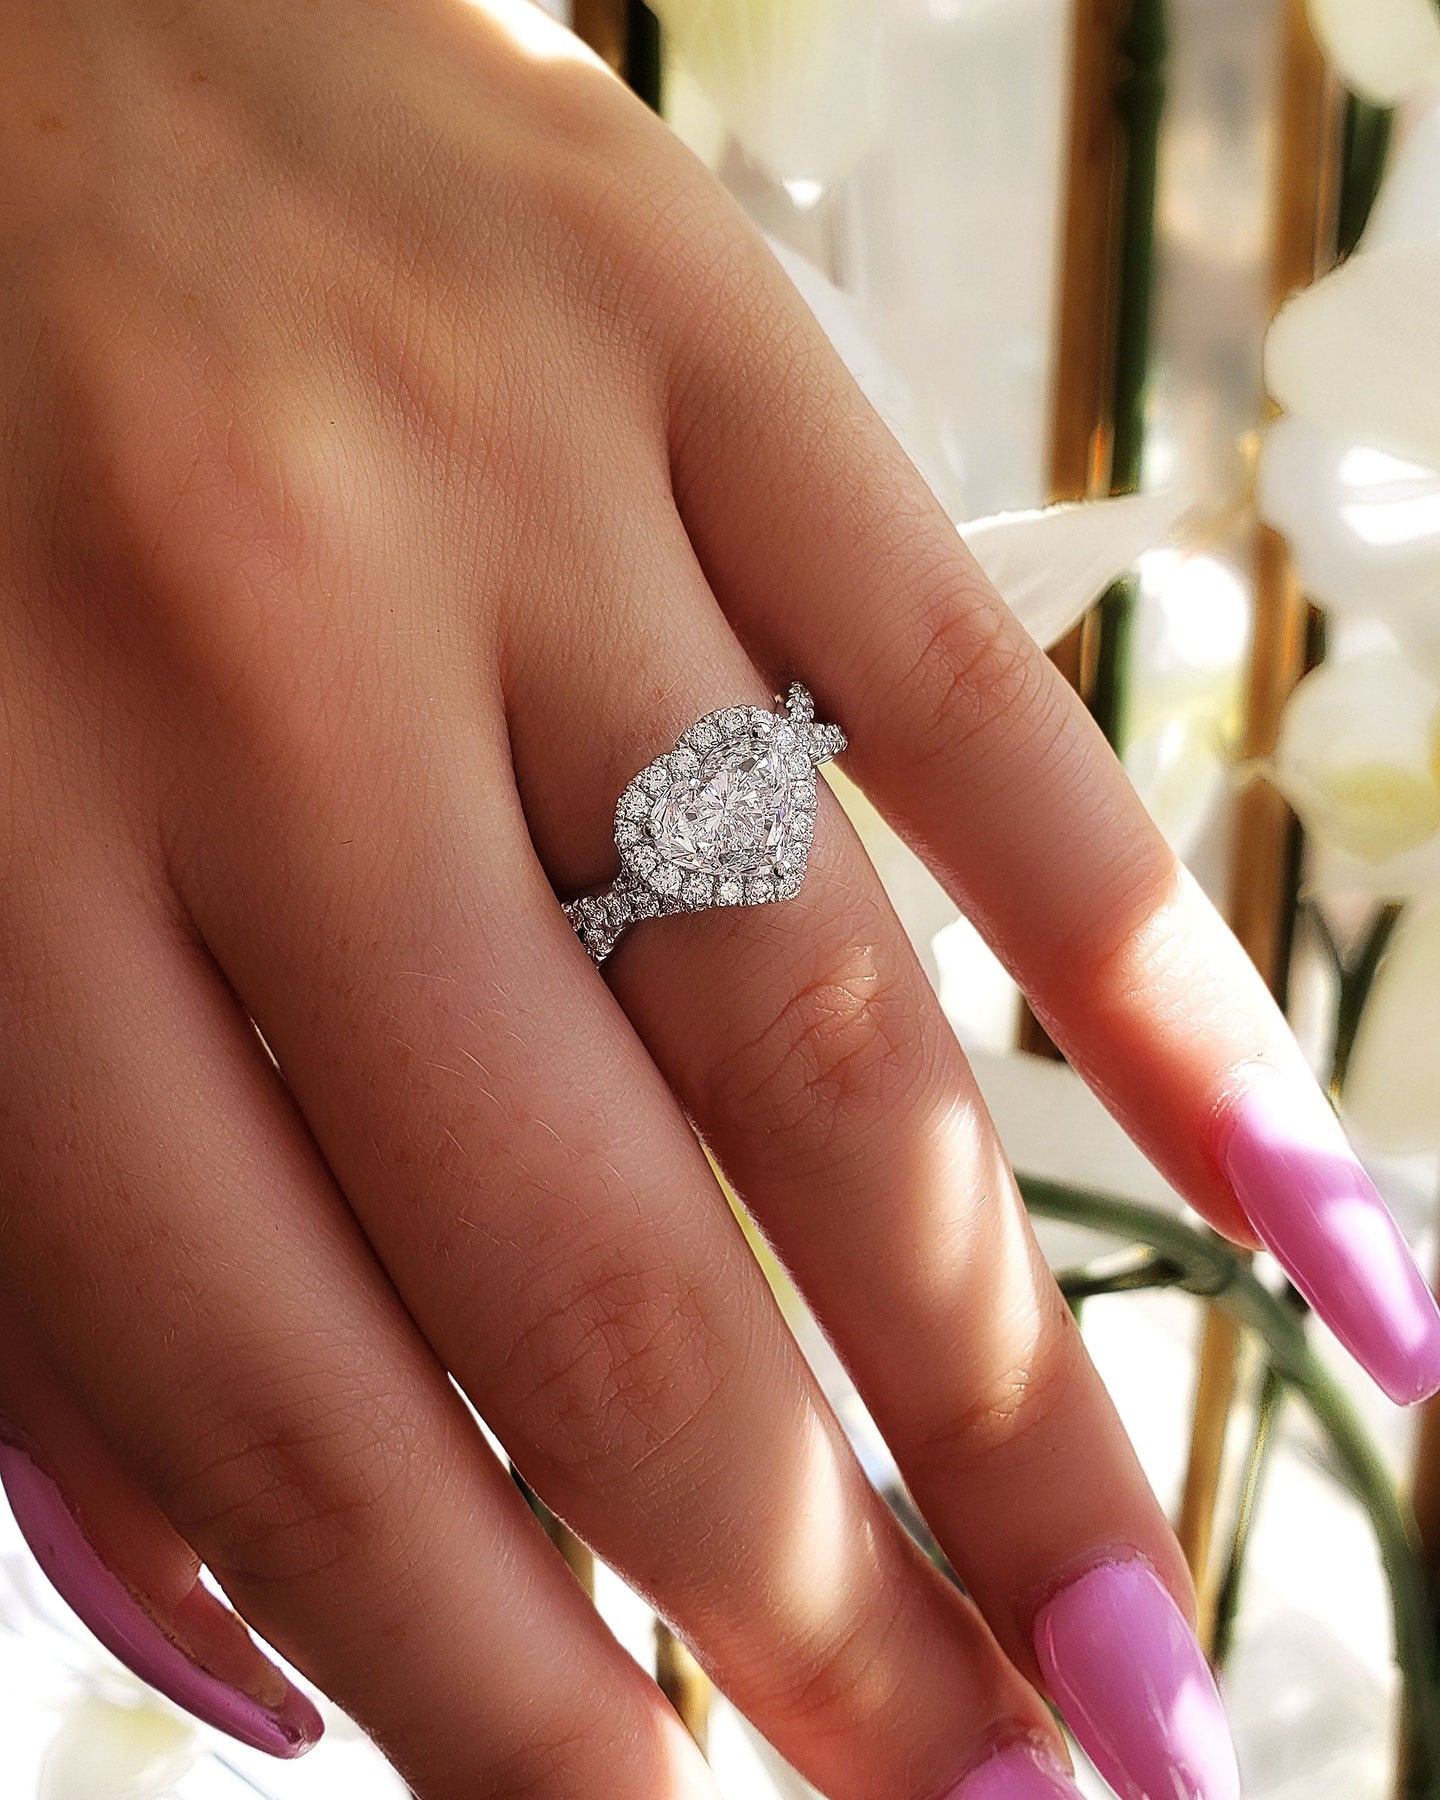 Enclosed in Heart Diamond Ring